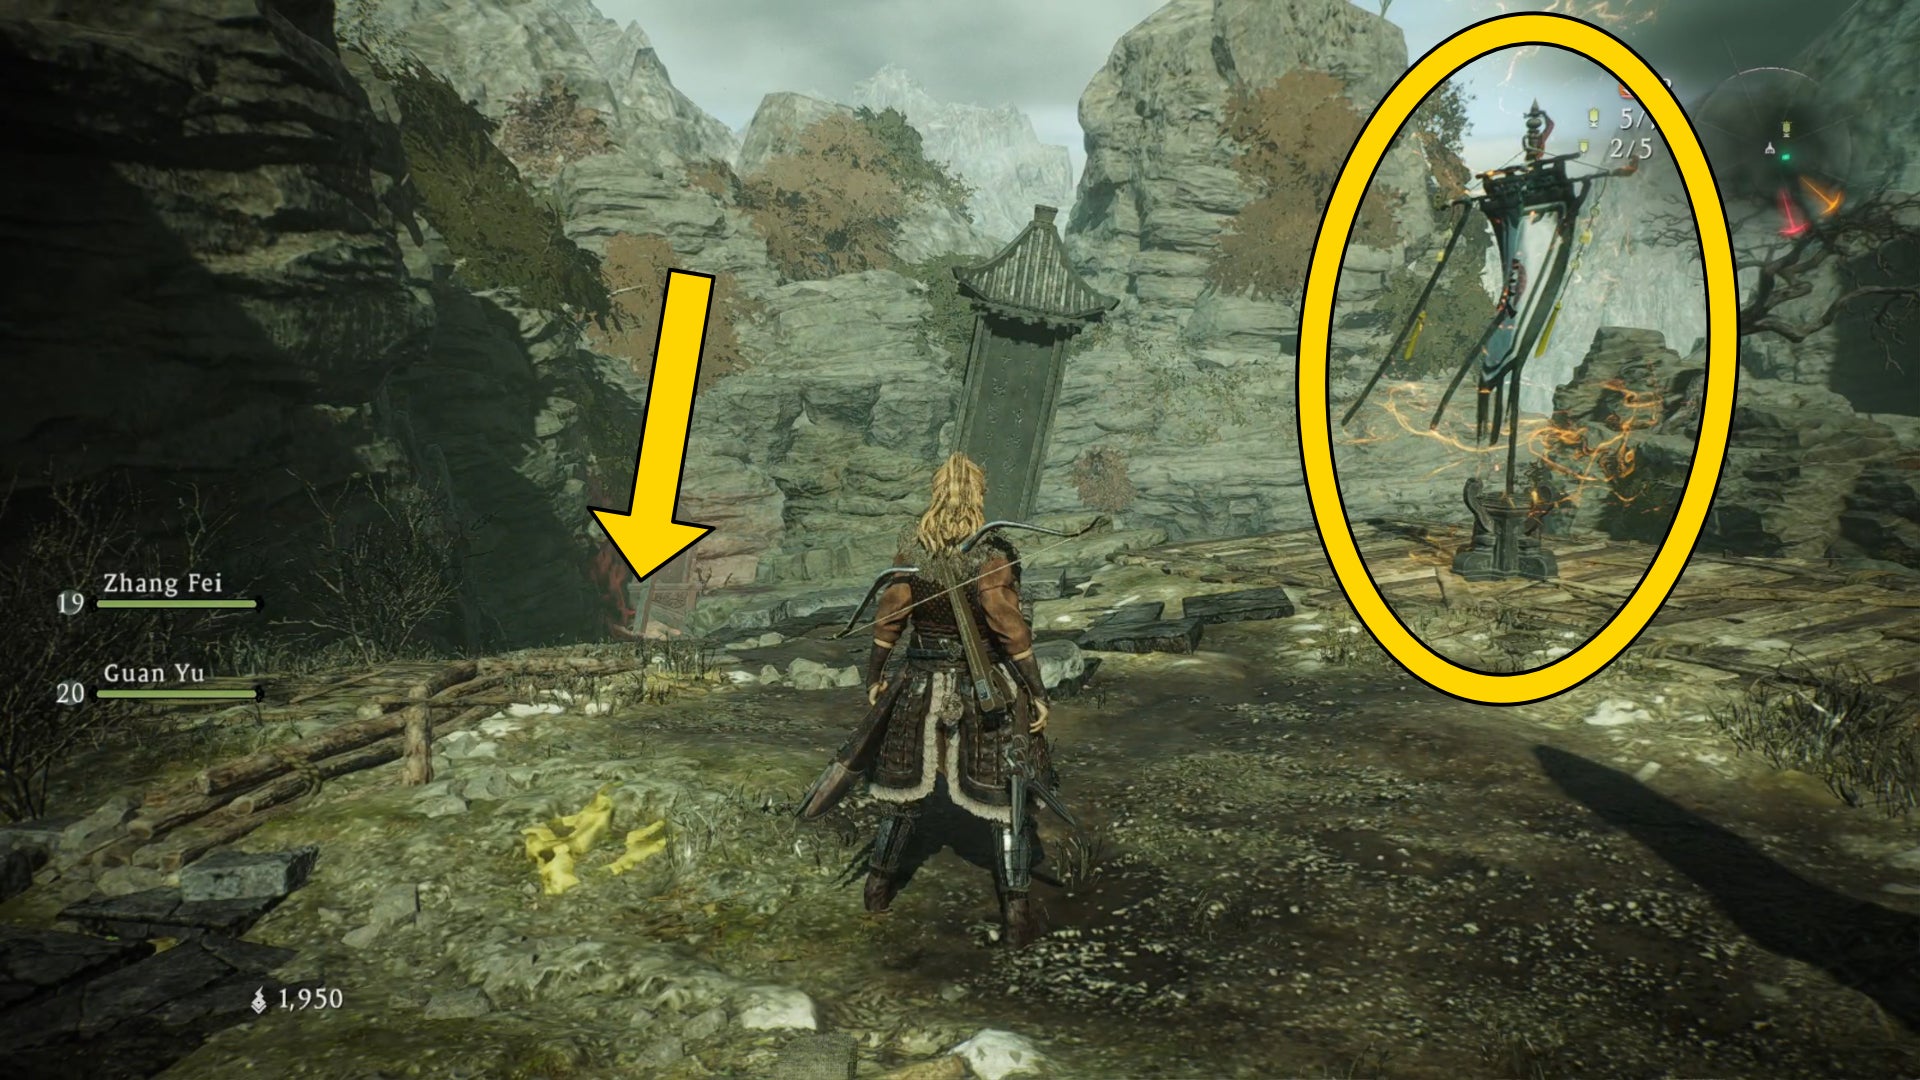 The player in Wo Long stands near a Battle Flag, with a circle and arrow marking the Flag and the path they must follow.